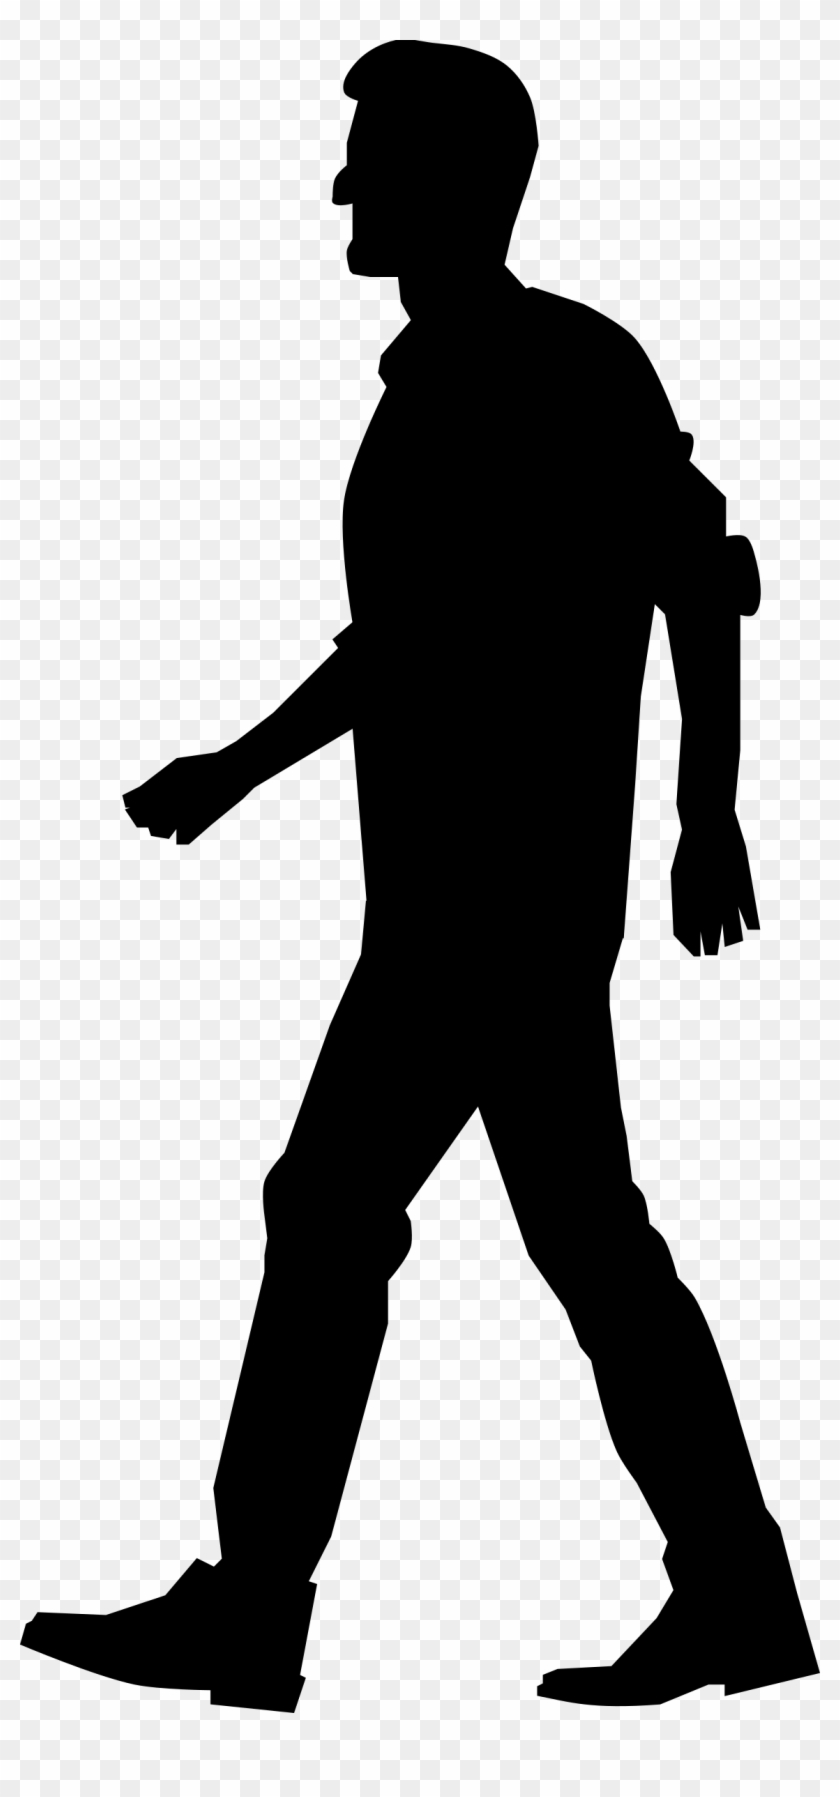 Download Clipart - Human Silhouette Walking Png - Free Transparent PNG Clipart Images Download